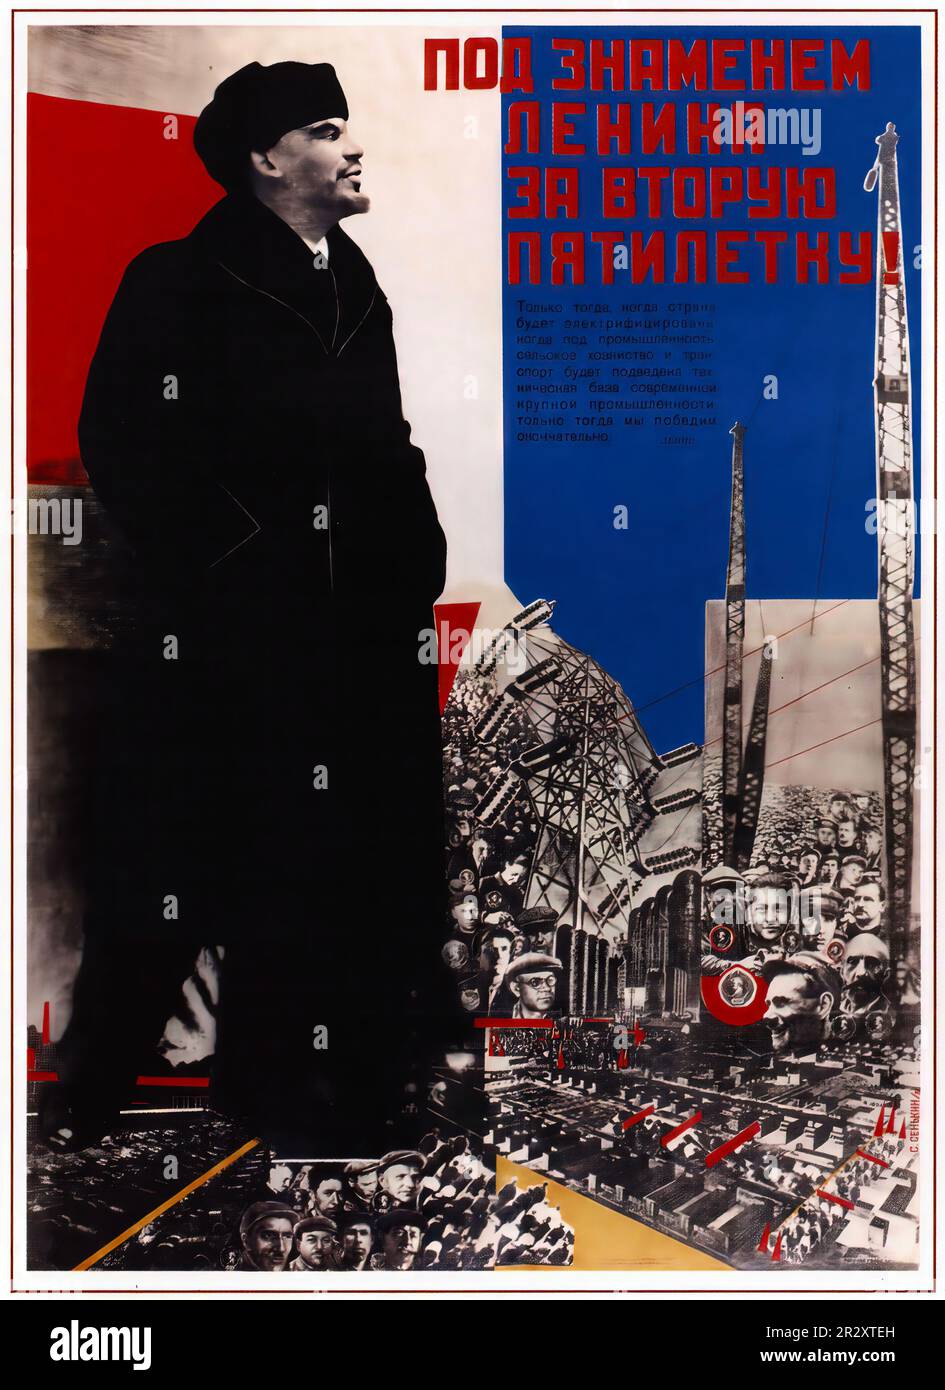 Propaganda posters depicting Lenin who founded the Soviet Union, a one-party socialist state ruled by the ideologically Marxist Communist Party Stock Photo